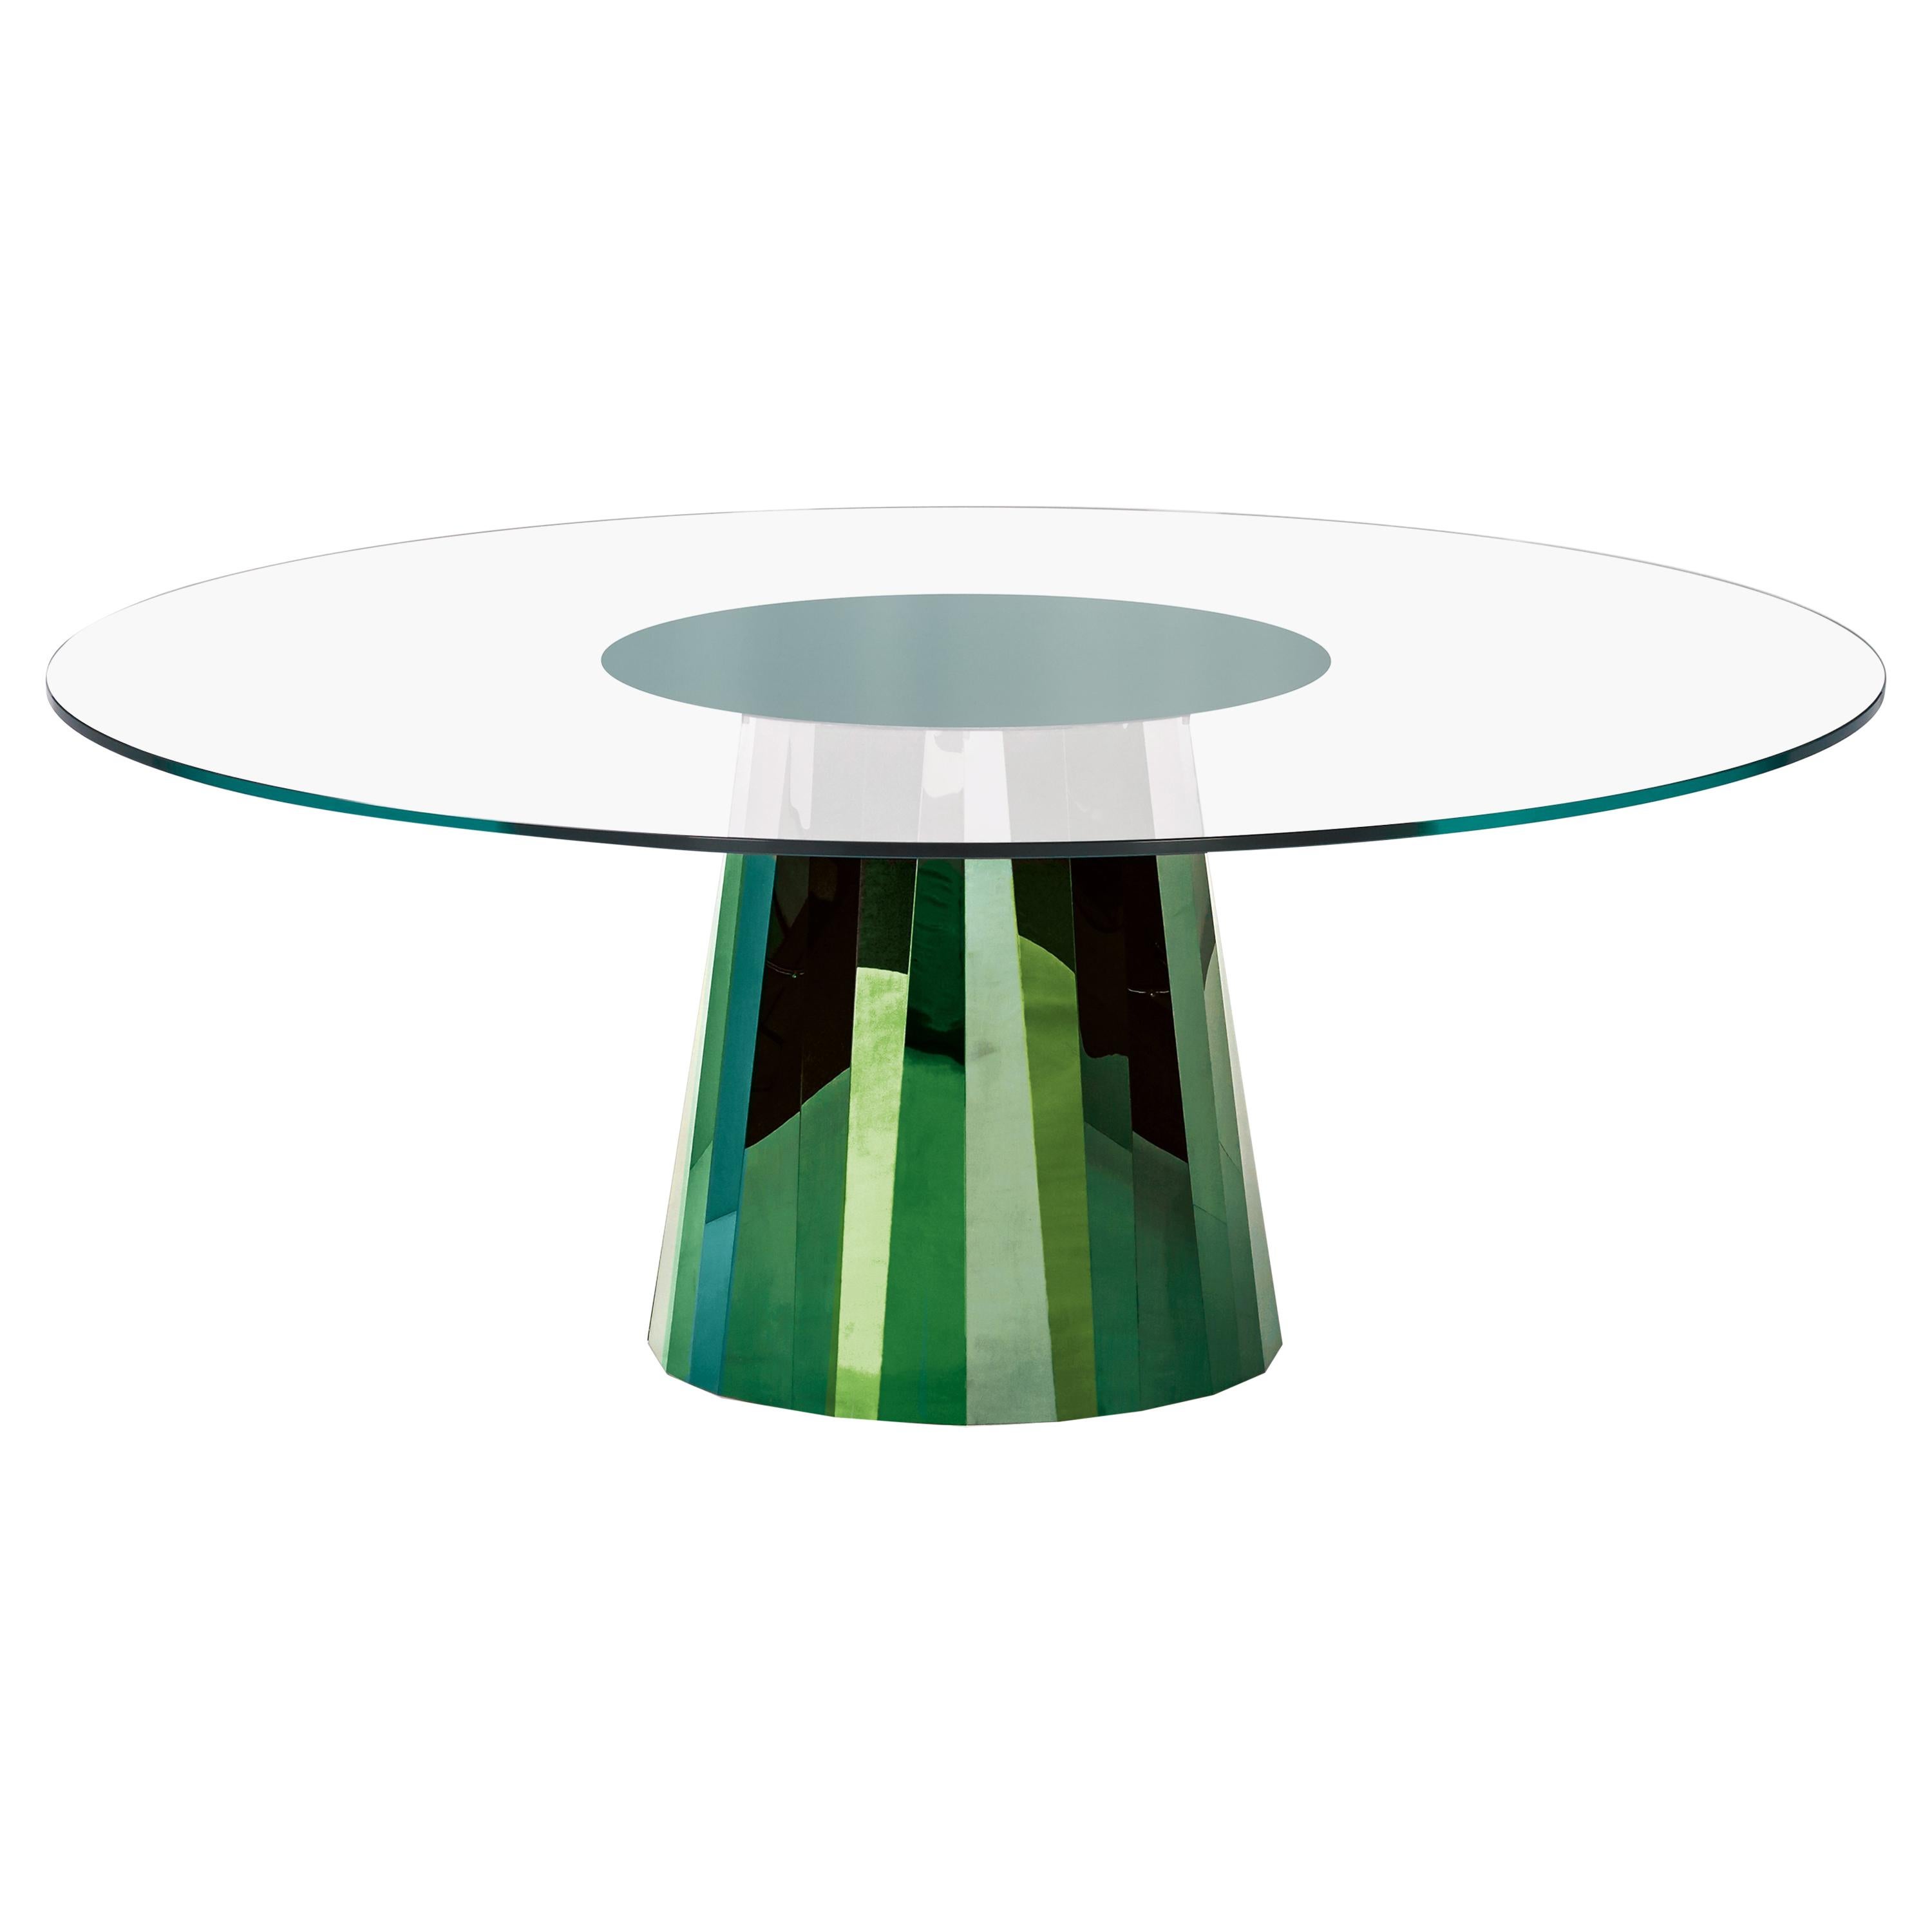 ClassiCon Pli Table in Green with Crystal Glass Top by Victoria Wilmotte